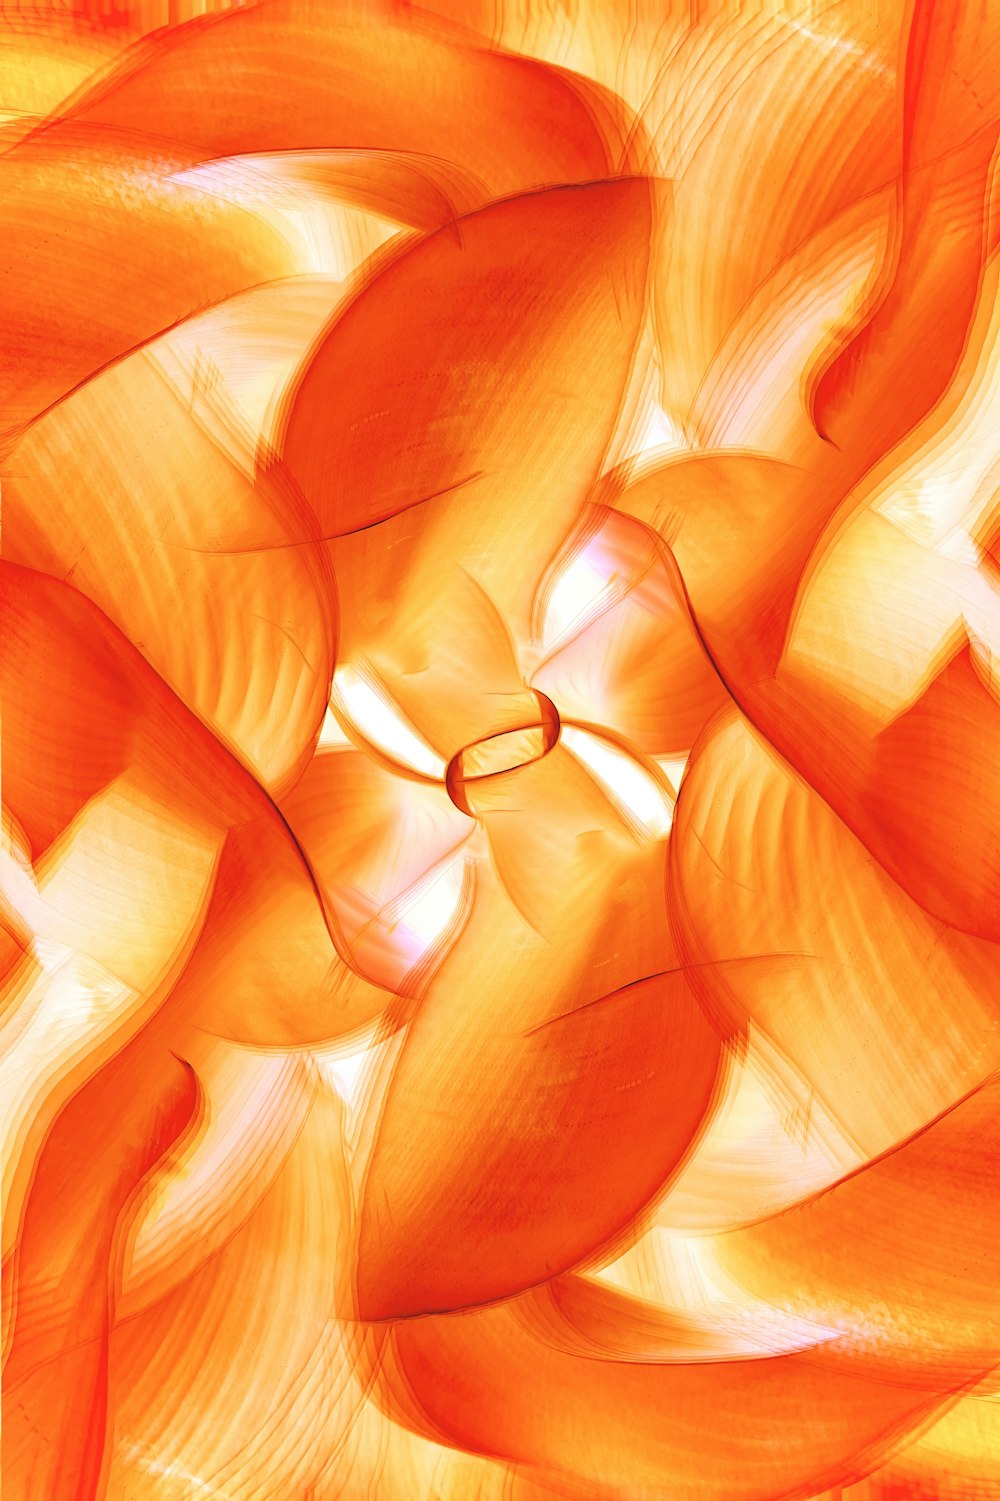 a computer generated image of an orange flower